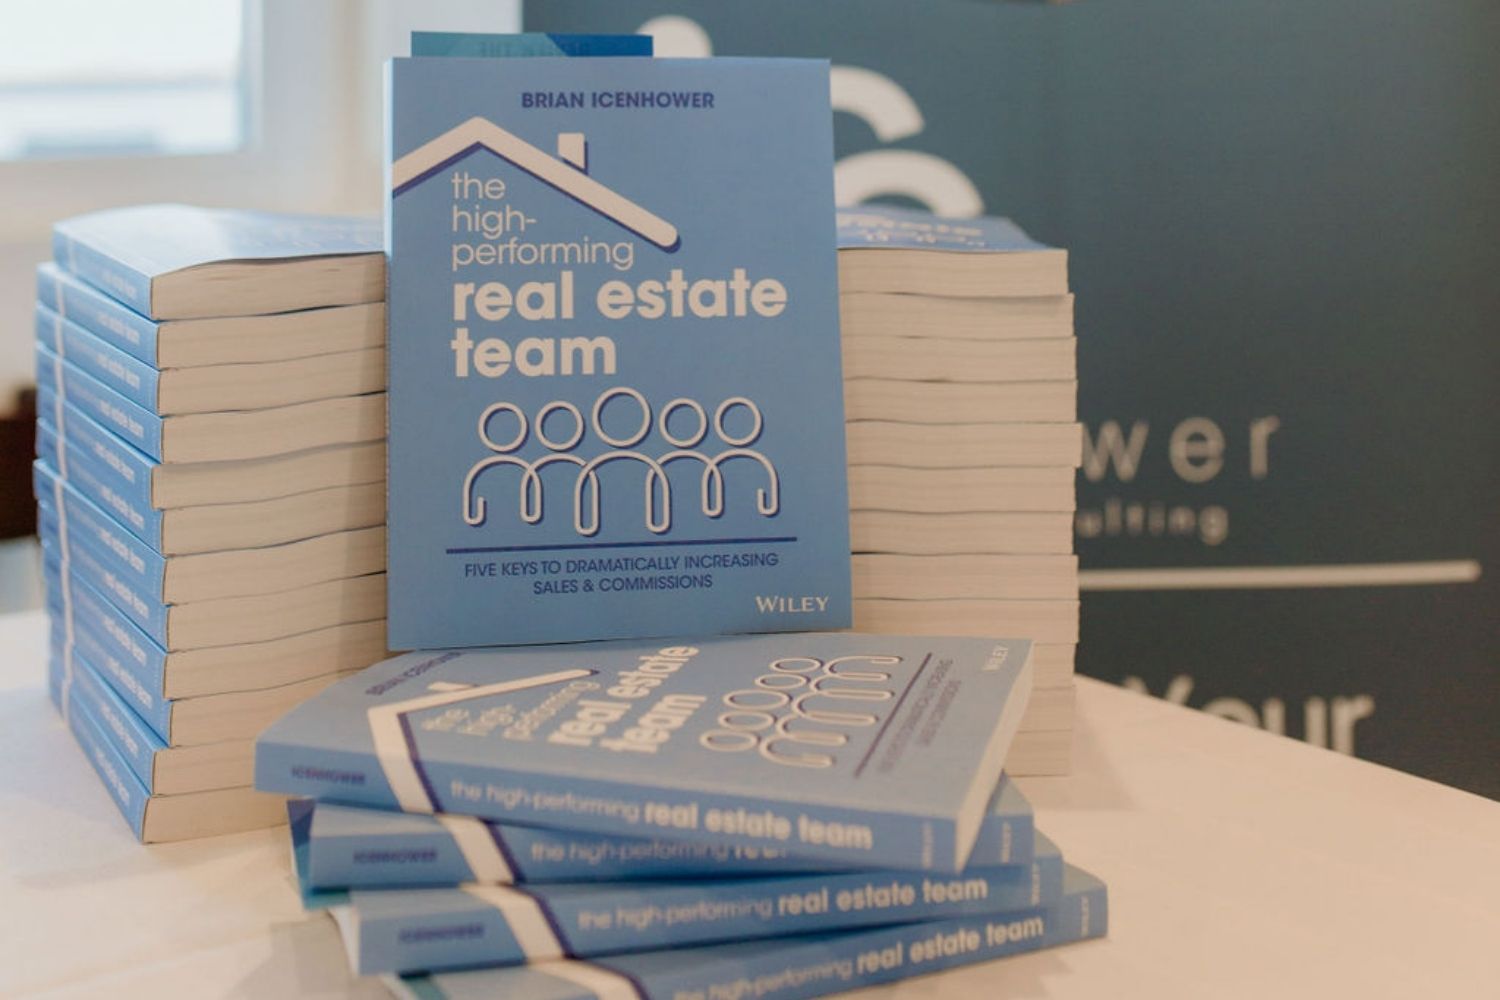 The Best Real Estate Team Books: Inman Recommends The High-Performing Real Estate Team